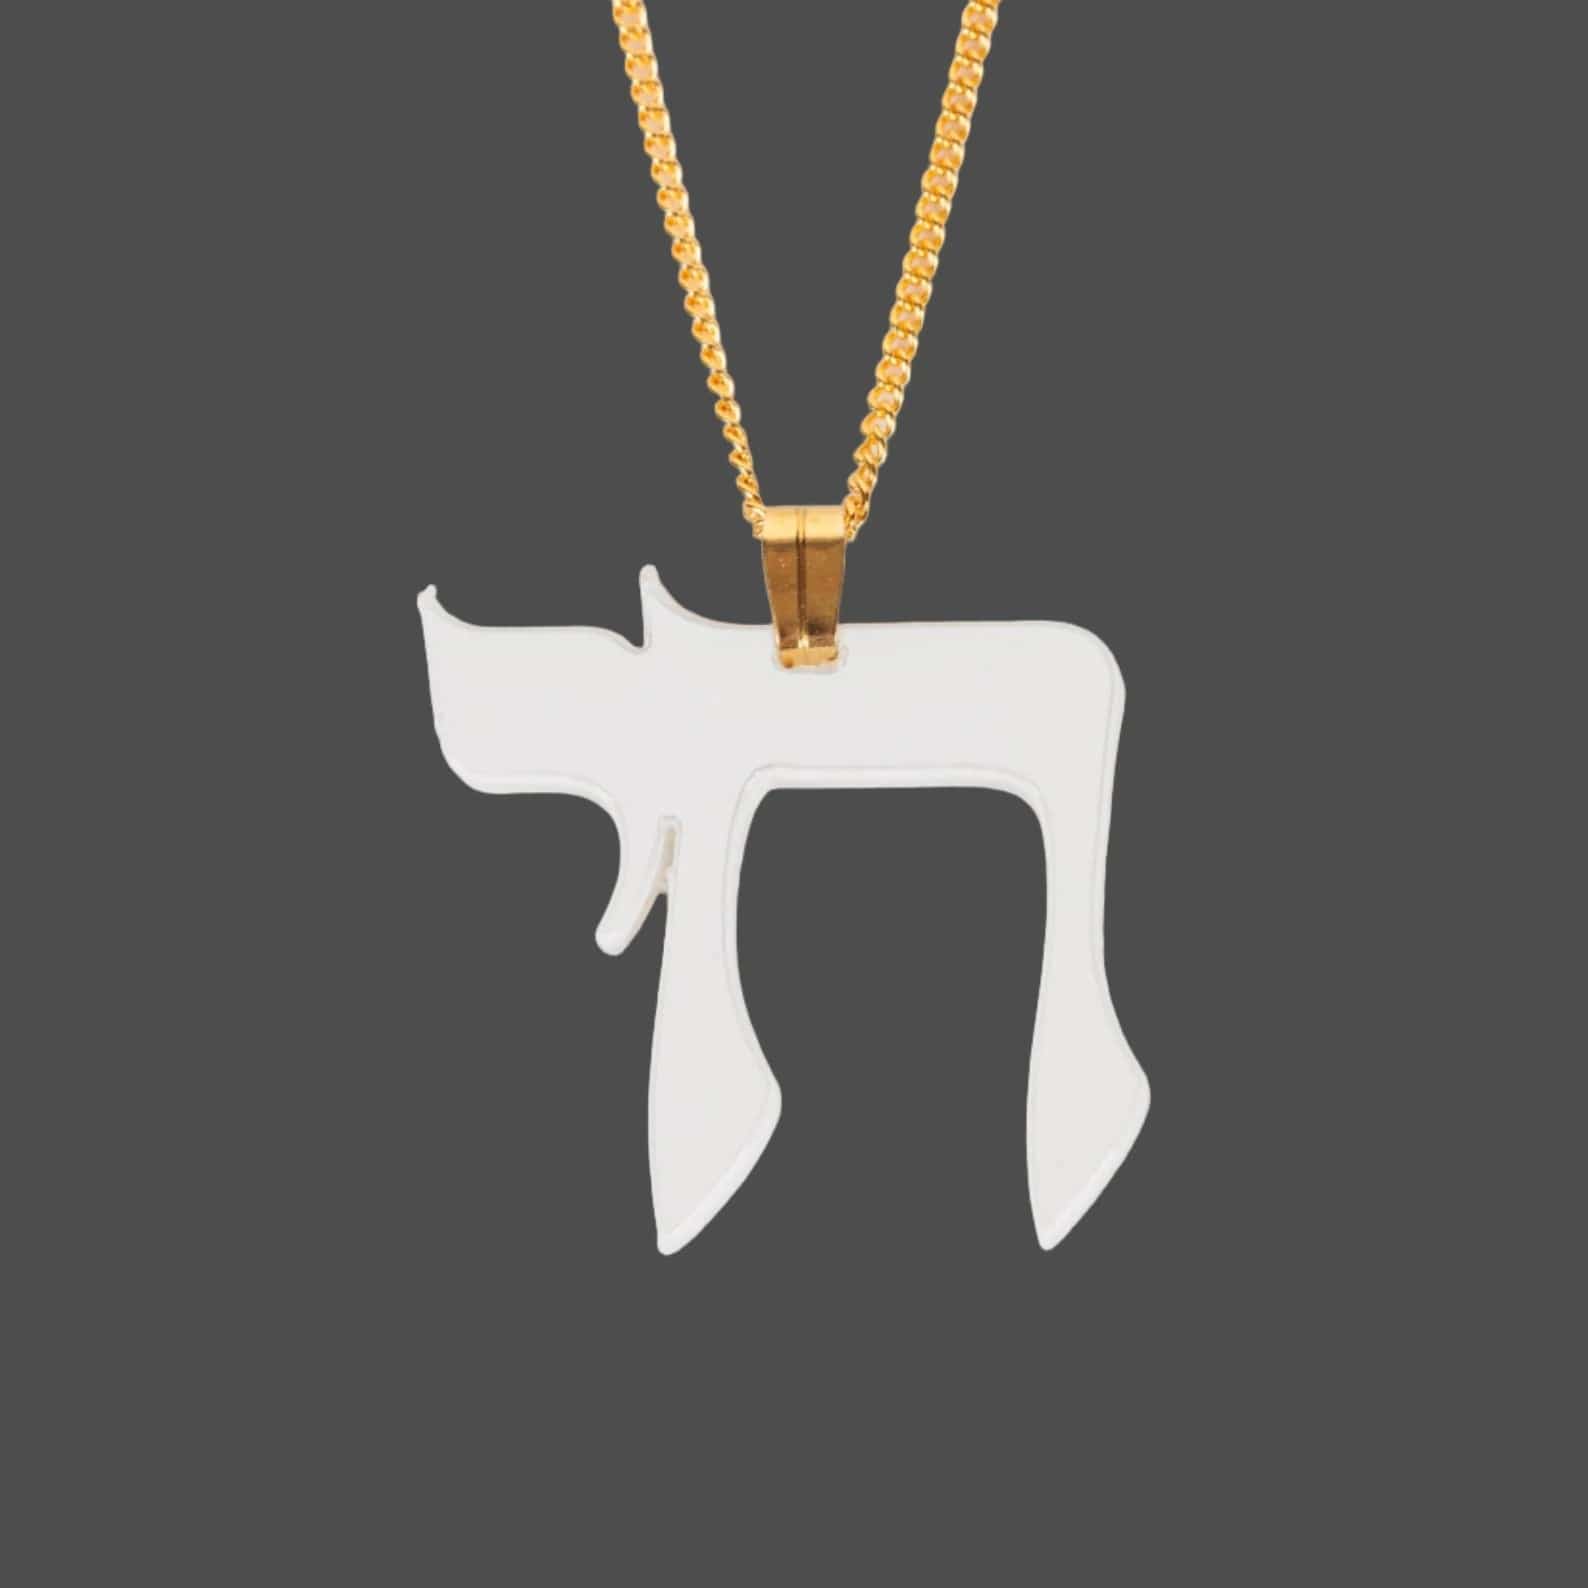 AnssiCandy Necklaces Hebrew Chai Necklace - White